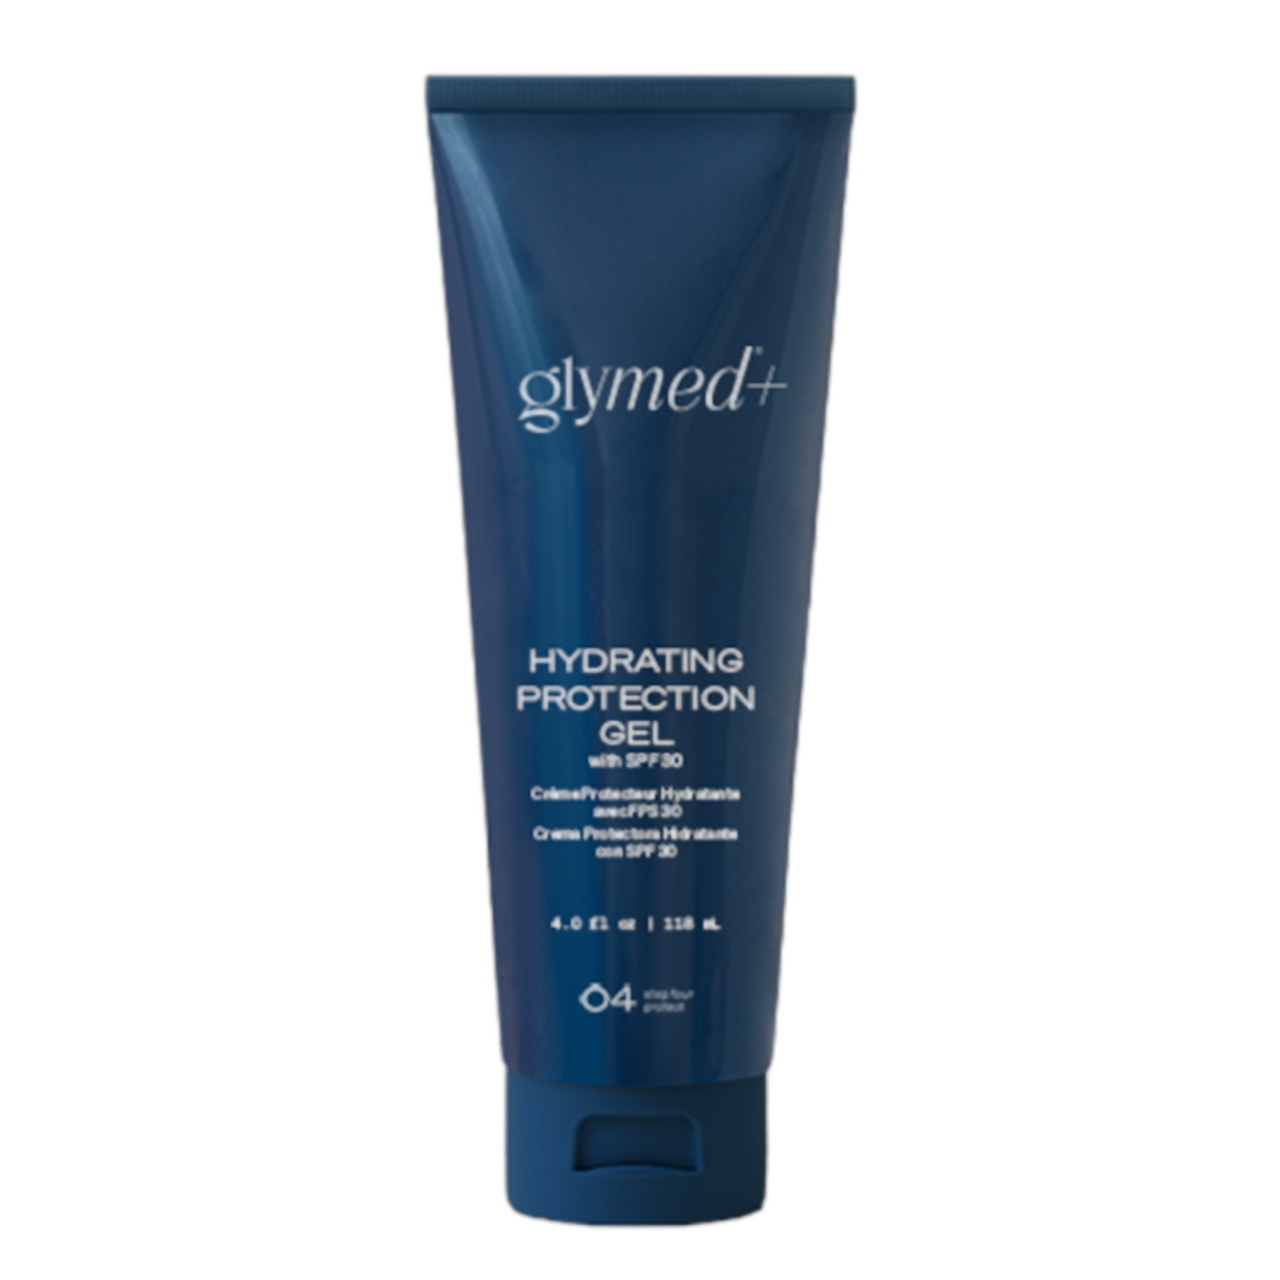 Glymed Plus Hydrating Protection Gel with SPF 30 - 4 oz Questions & Answers